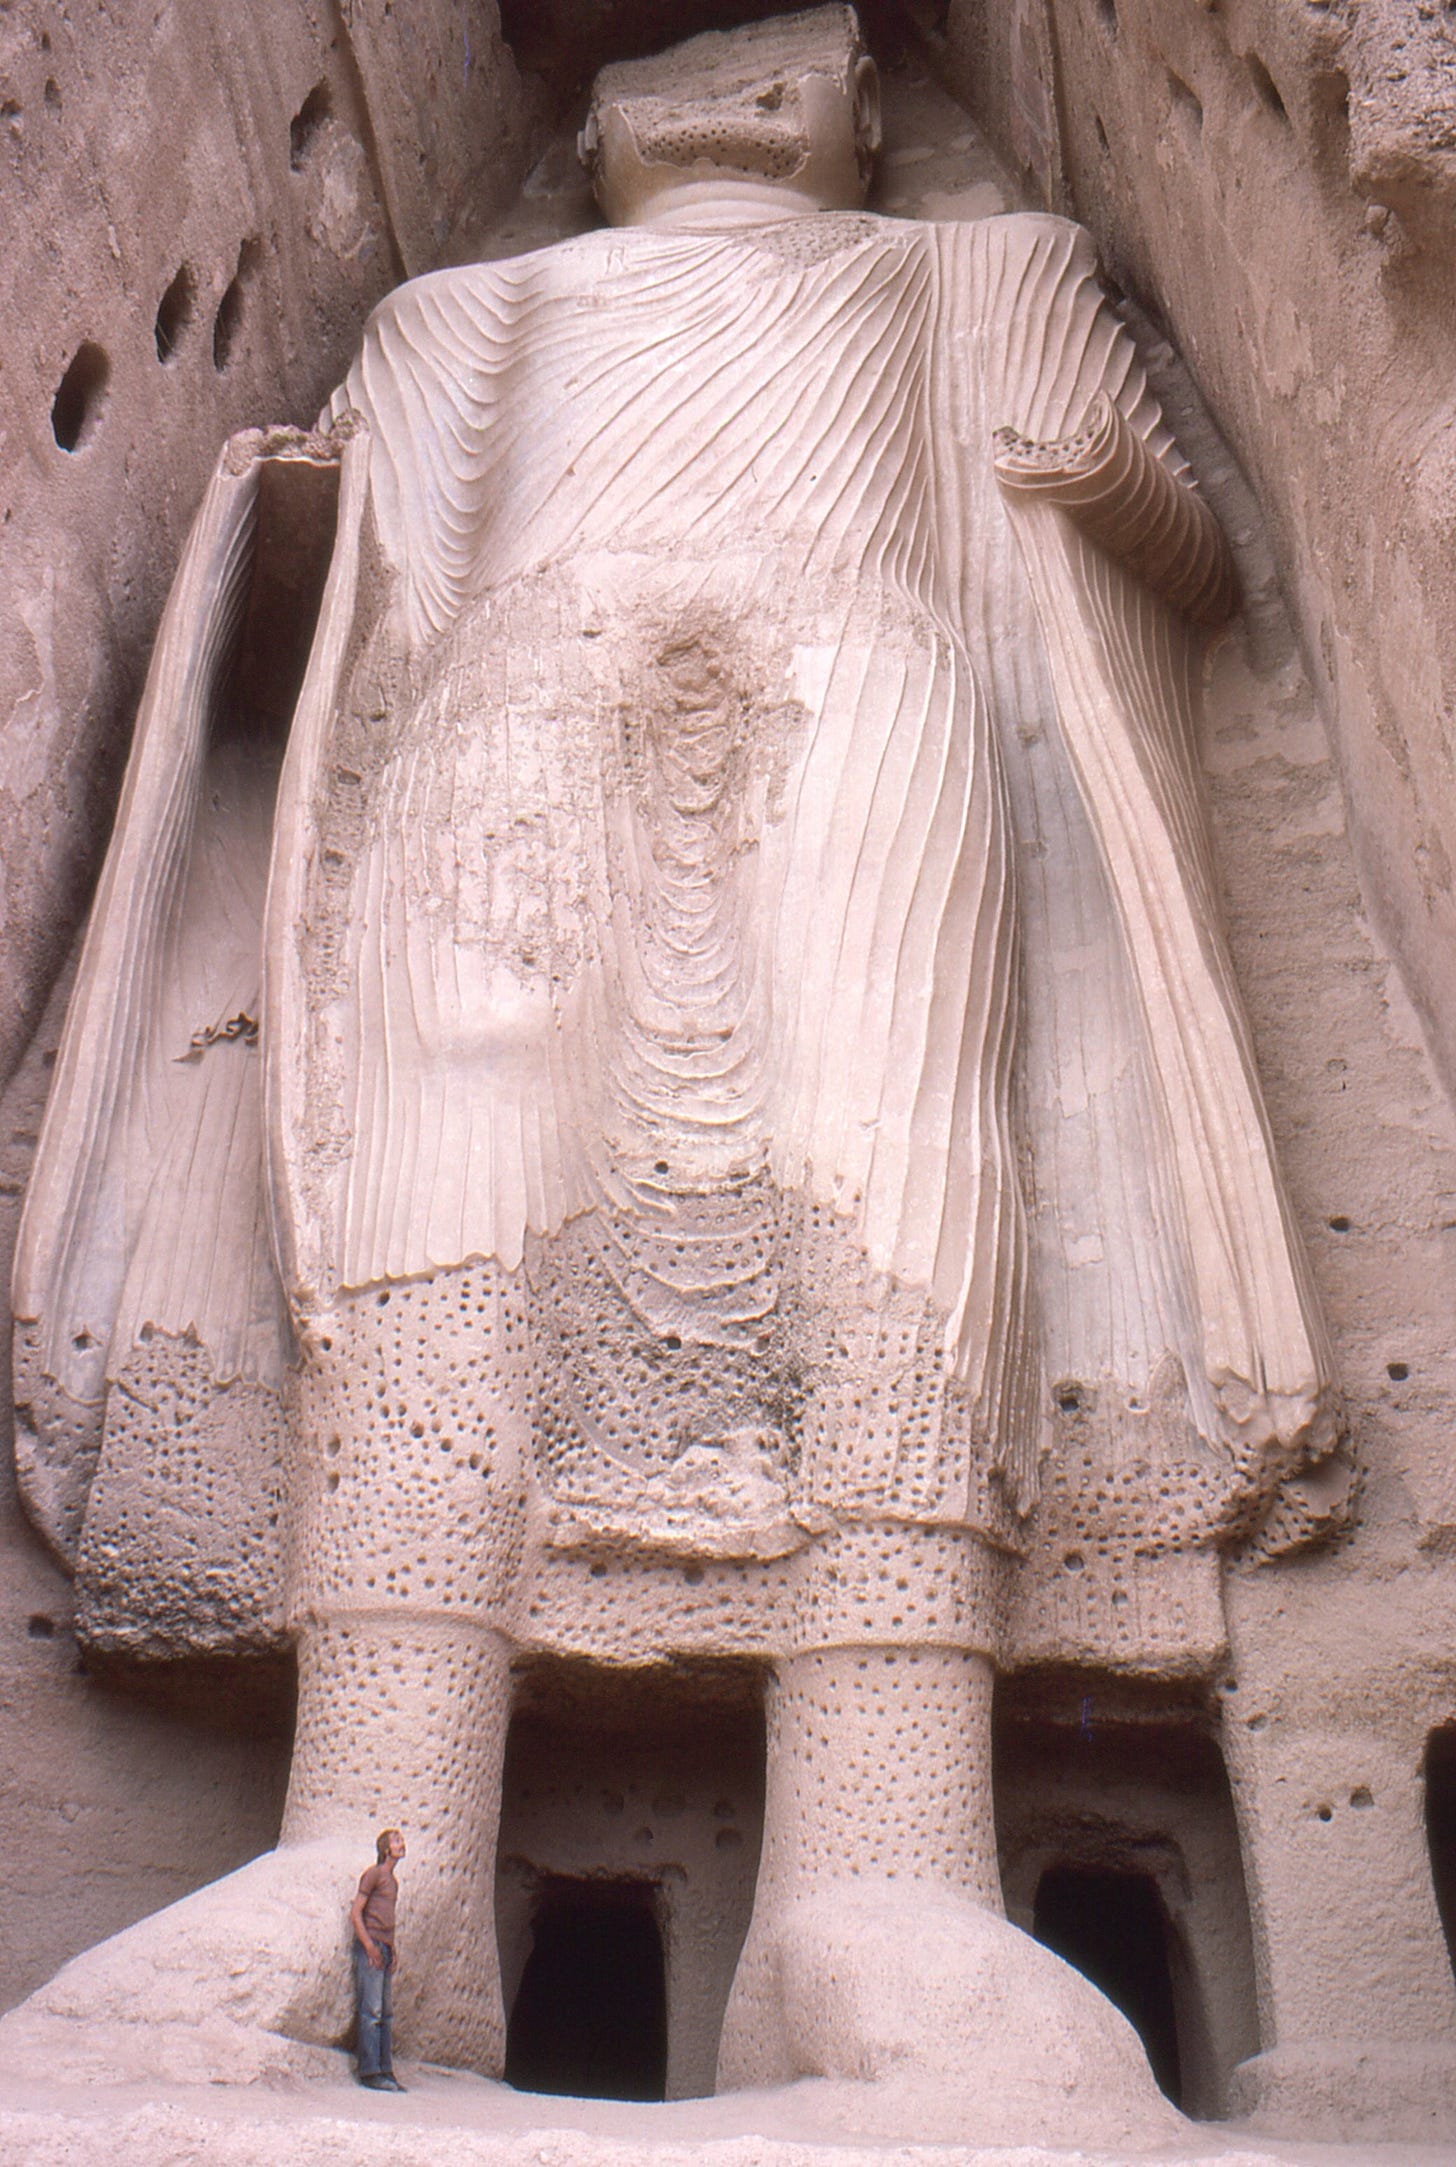 A picture of the smaller Buddha in Bamiyan, Afghanistan